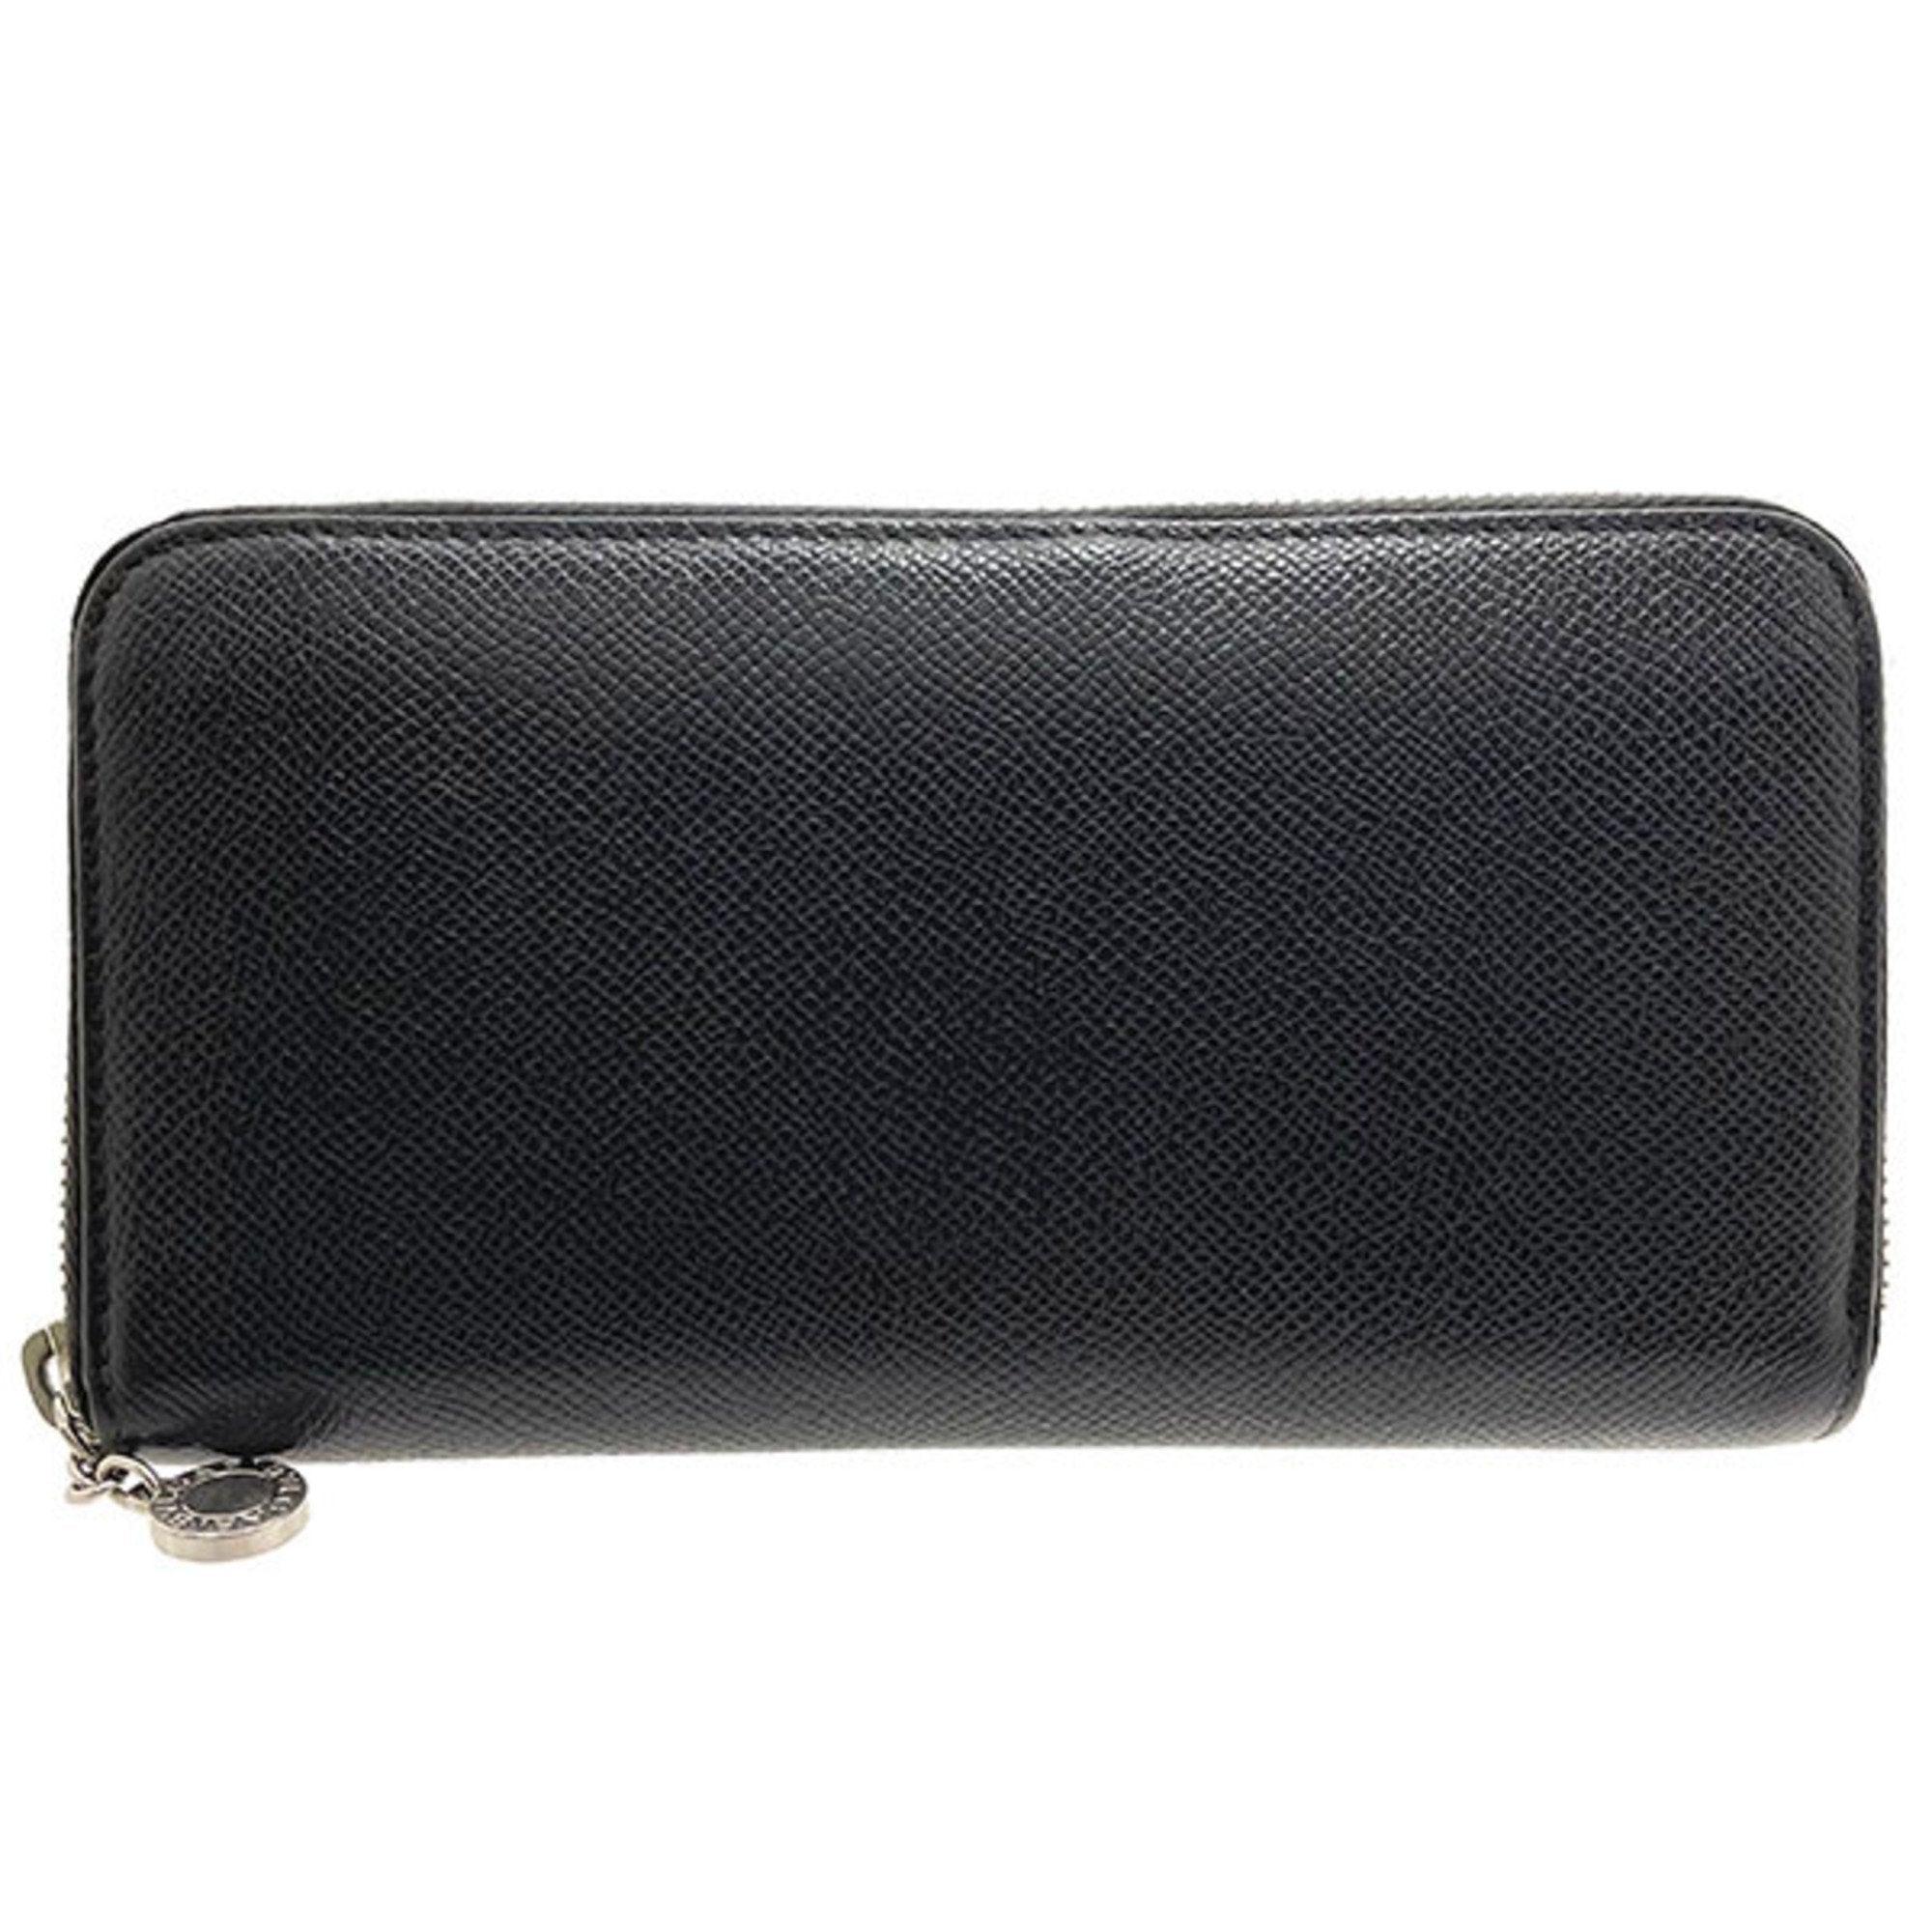 Long Wallet Classico Round Leather Black 20886 Men's AA-11964